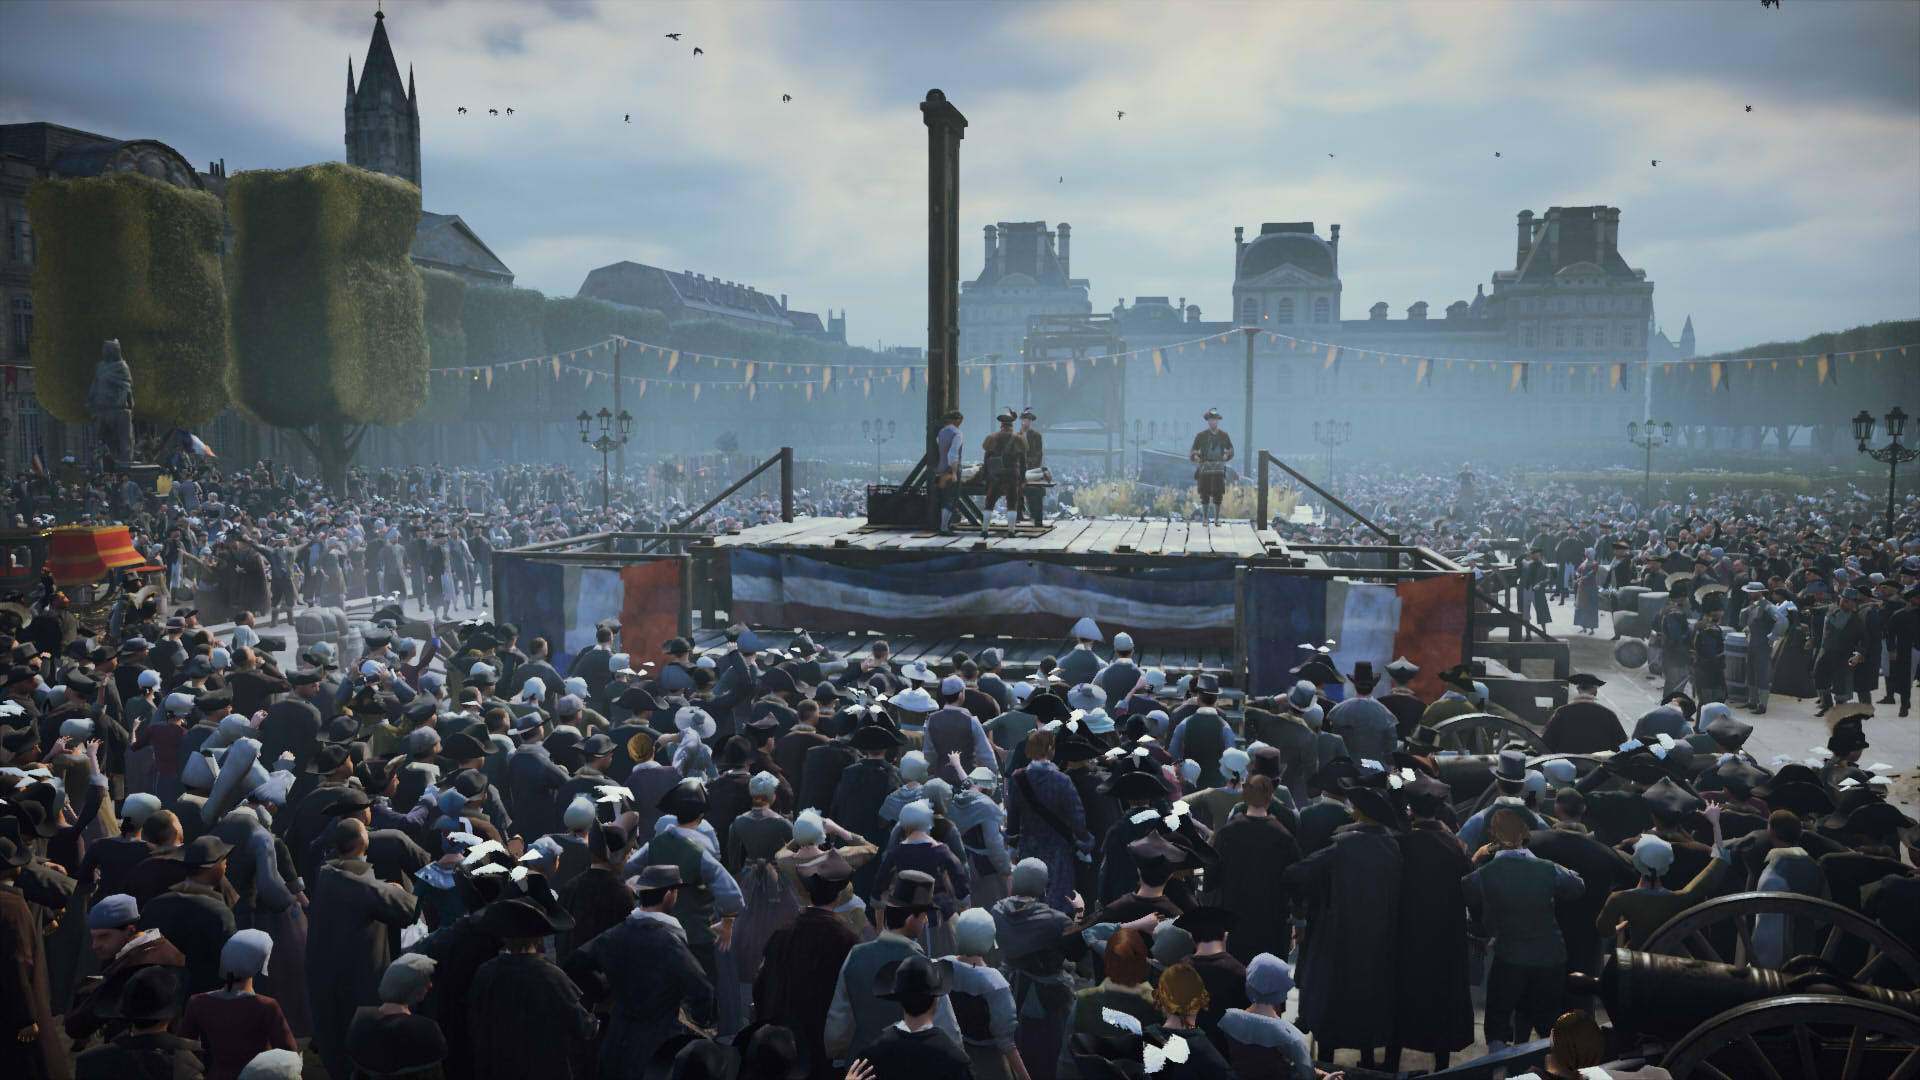 File:PAX South 2015 - Assassin's Creed- Unity (16173428860).jpg - Wikipedia